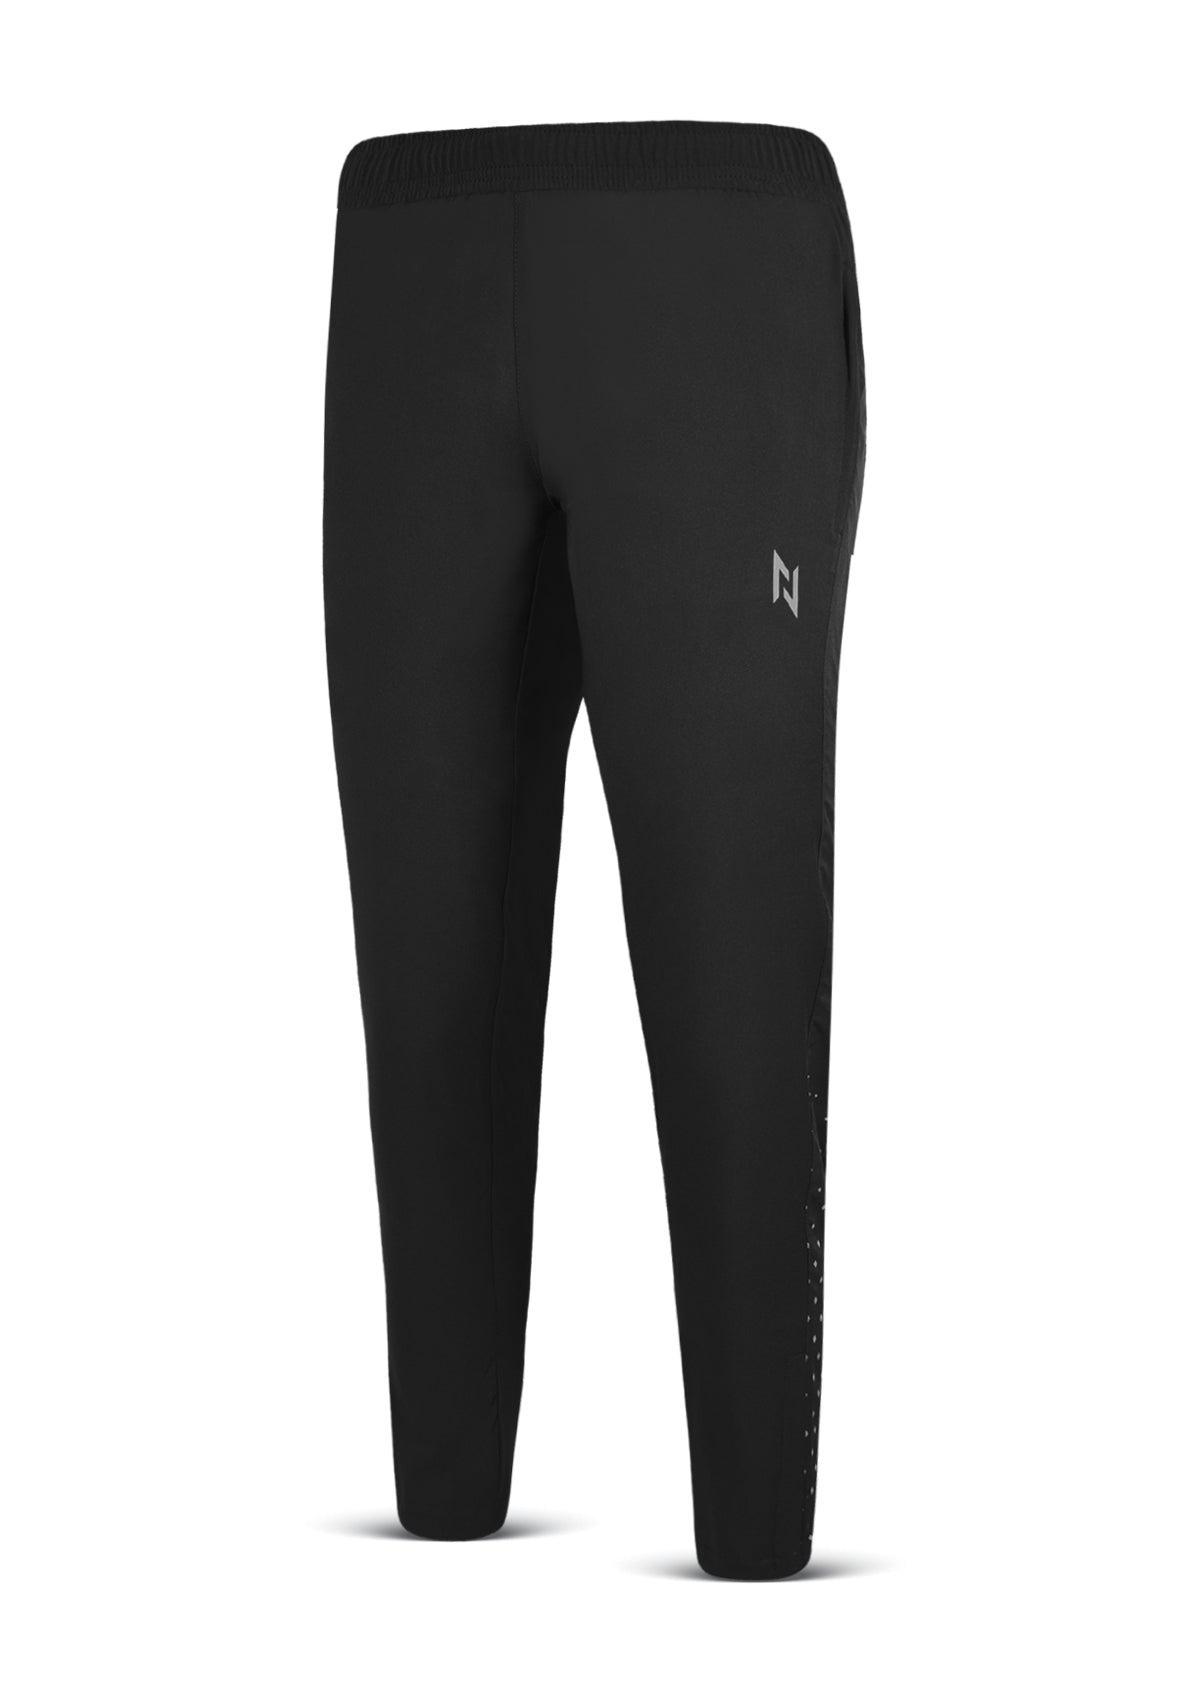 ASTRO SWIFT TROUSERS - Nomad Apparel